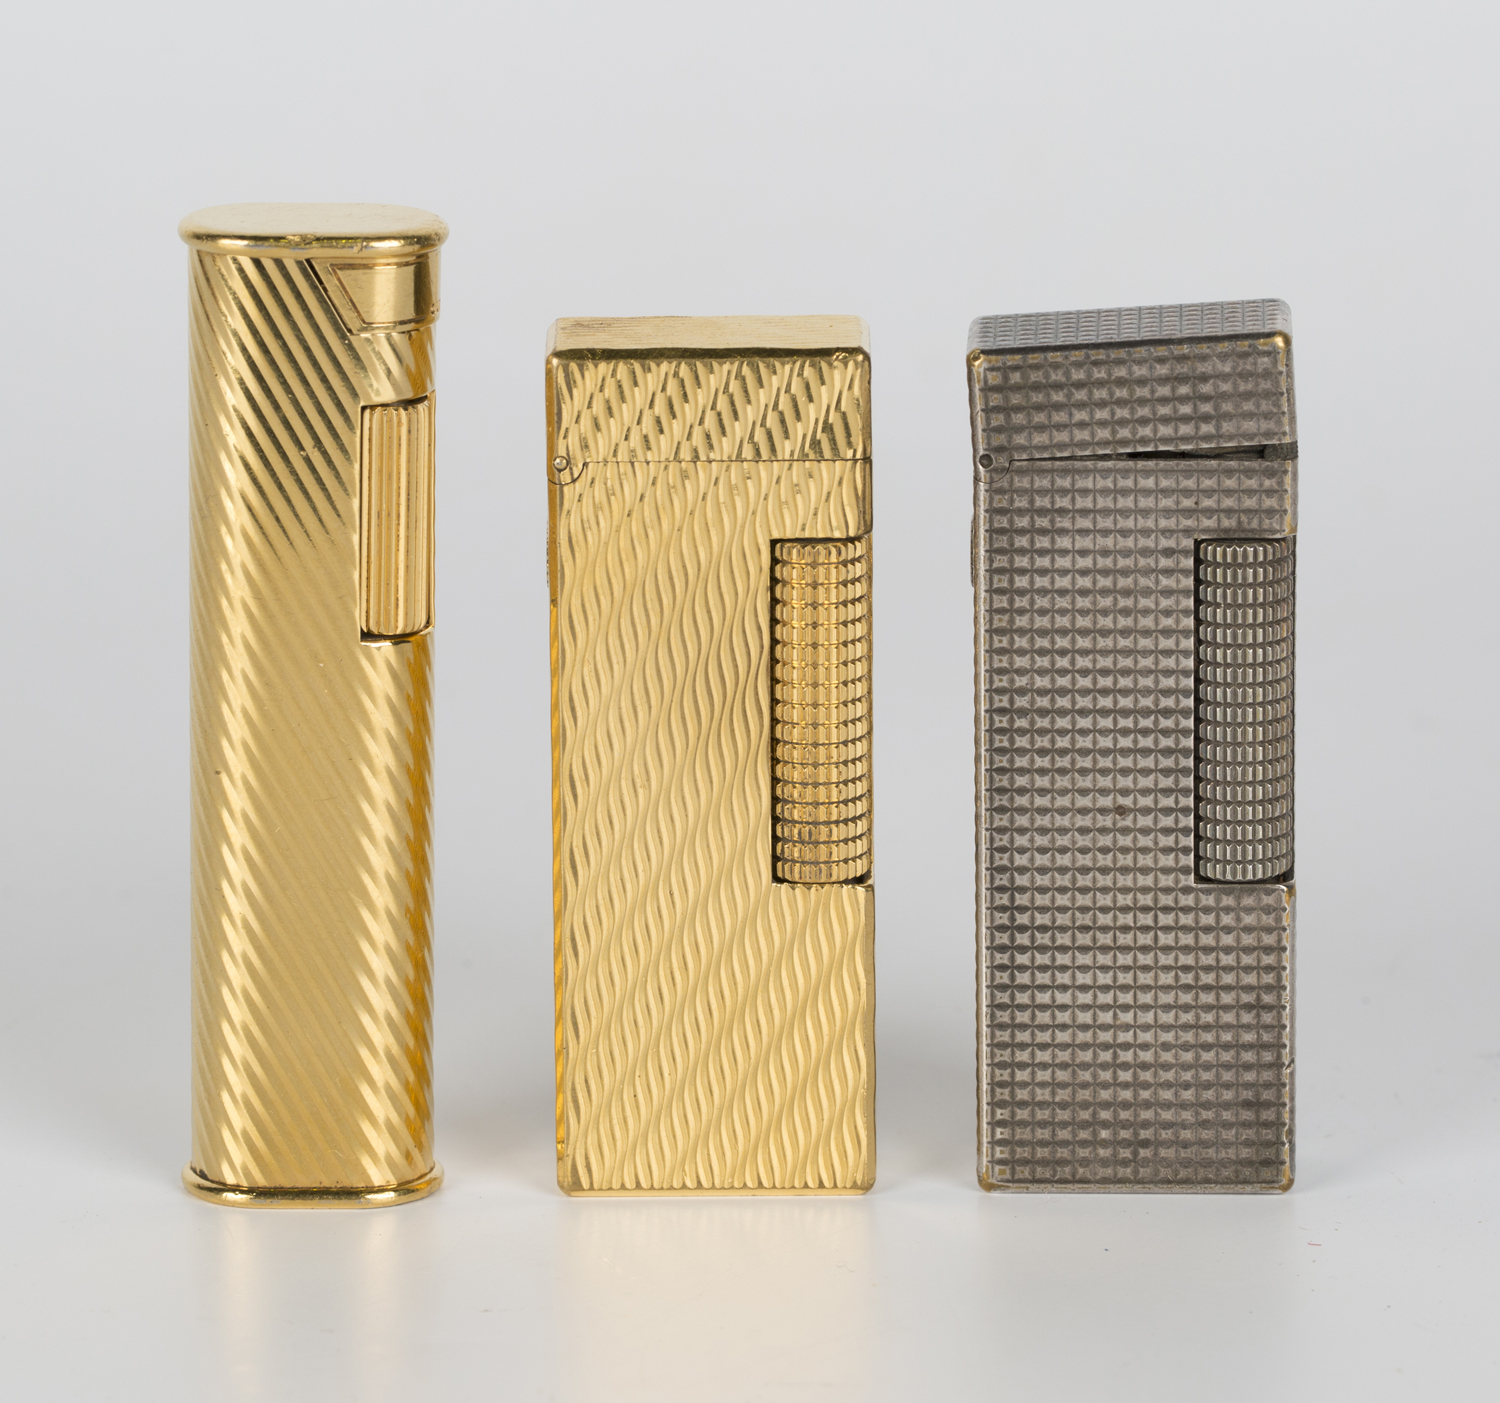 To grader anekdote Ægte A Dunhill silver plated rectangular gas lighter and two Dunhill gold plated  gas lighters.